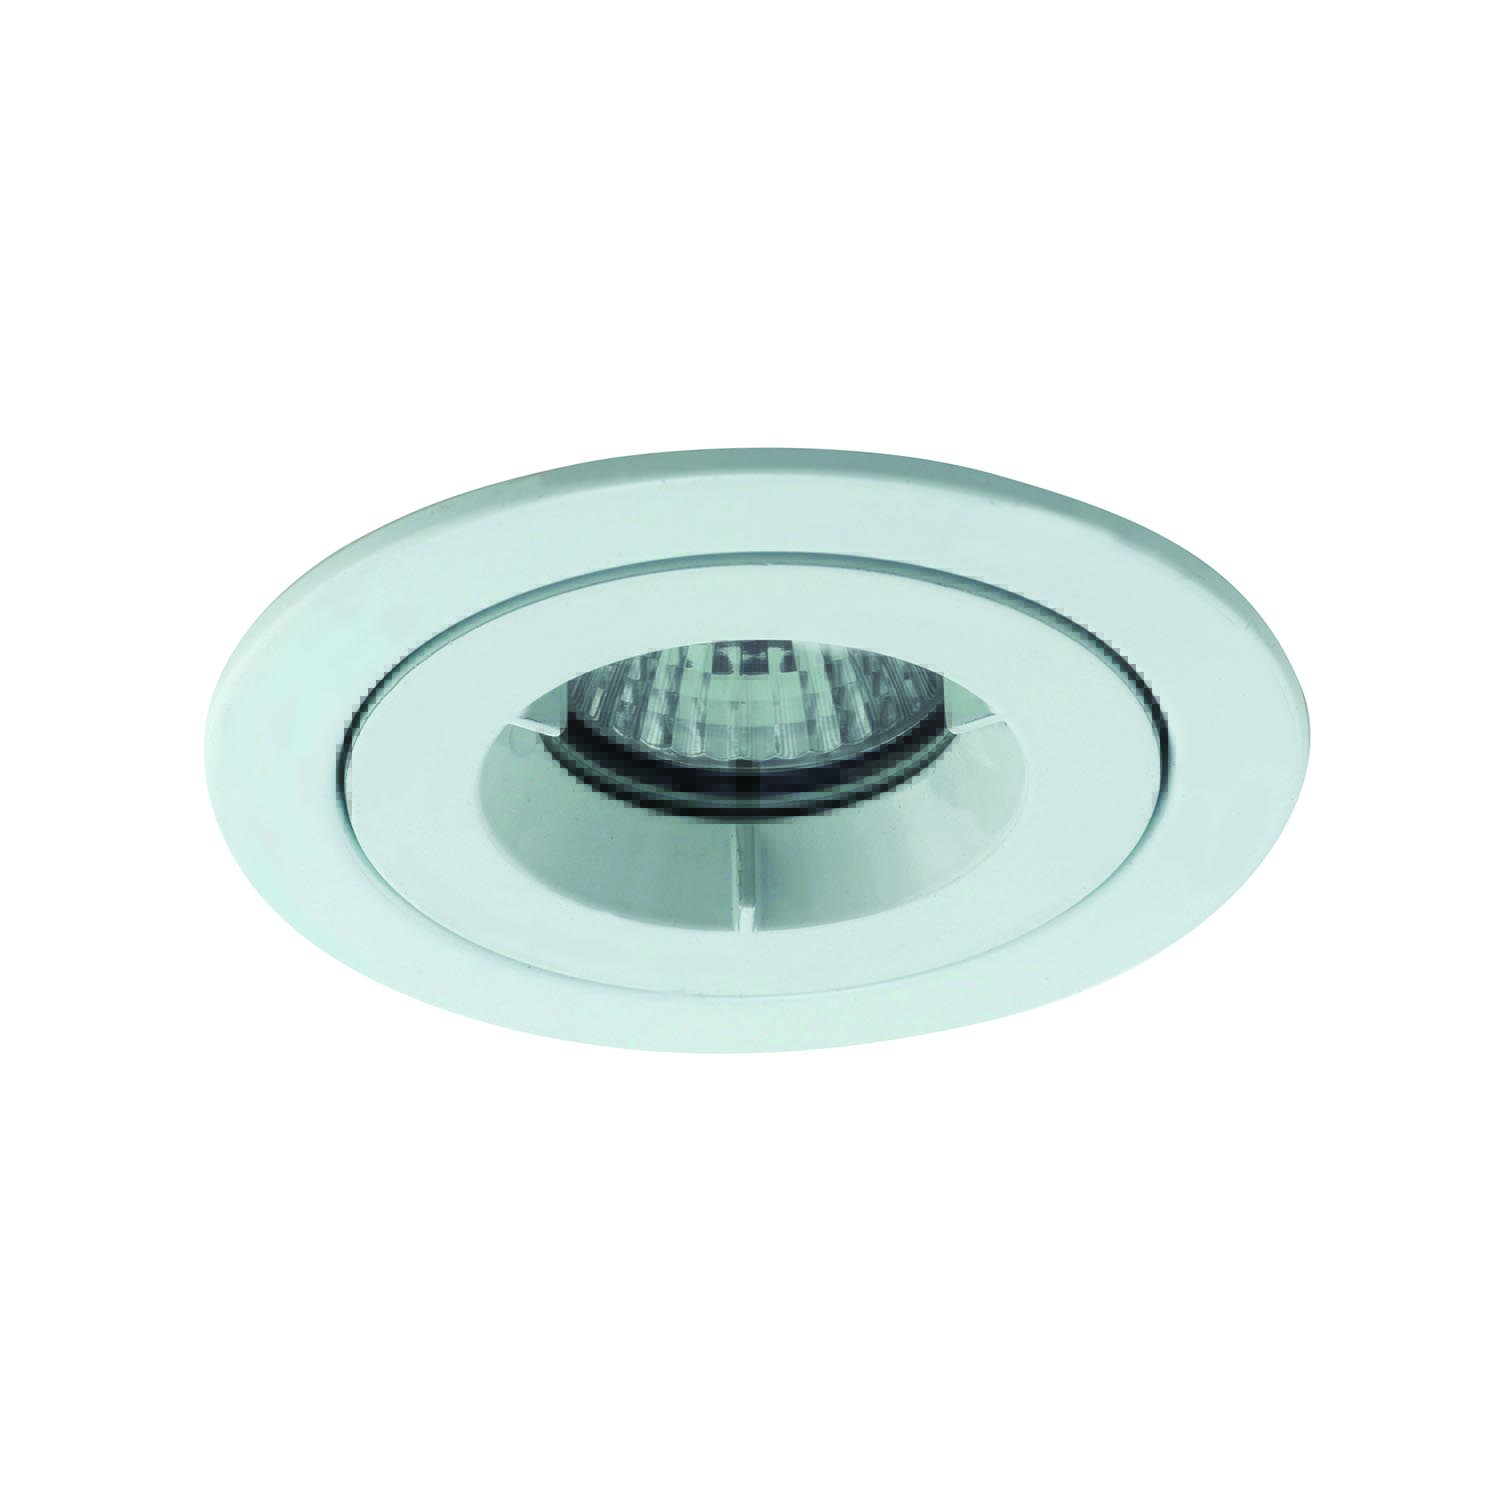 Ansell iCage Mini Downlight GU10 Fitting White IP65 AMICD-IP65-W Main